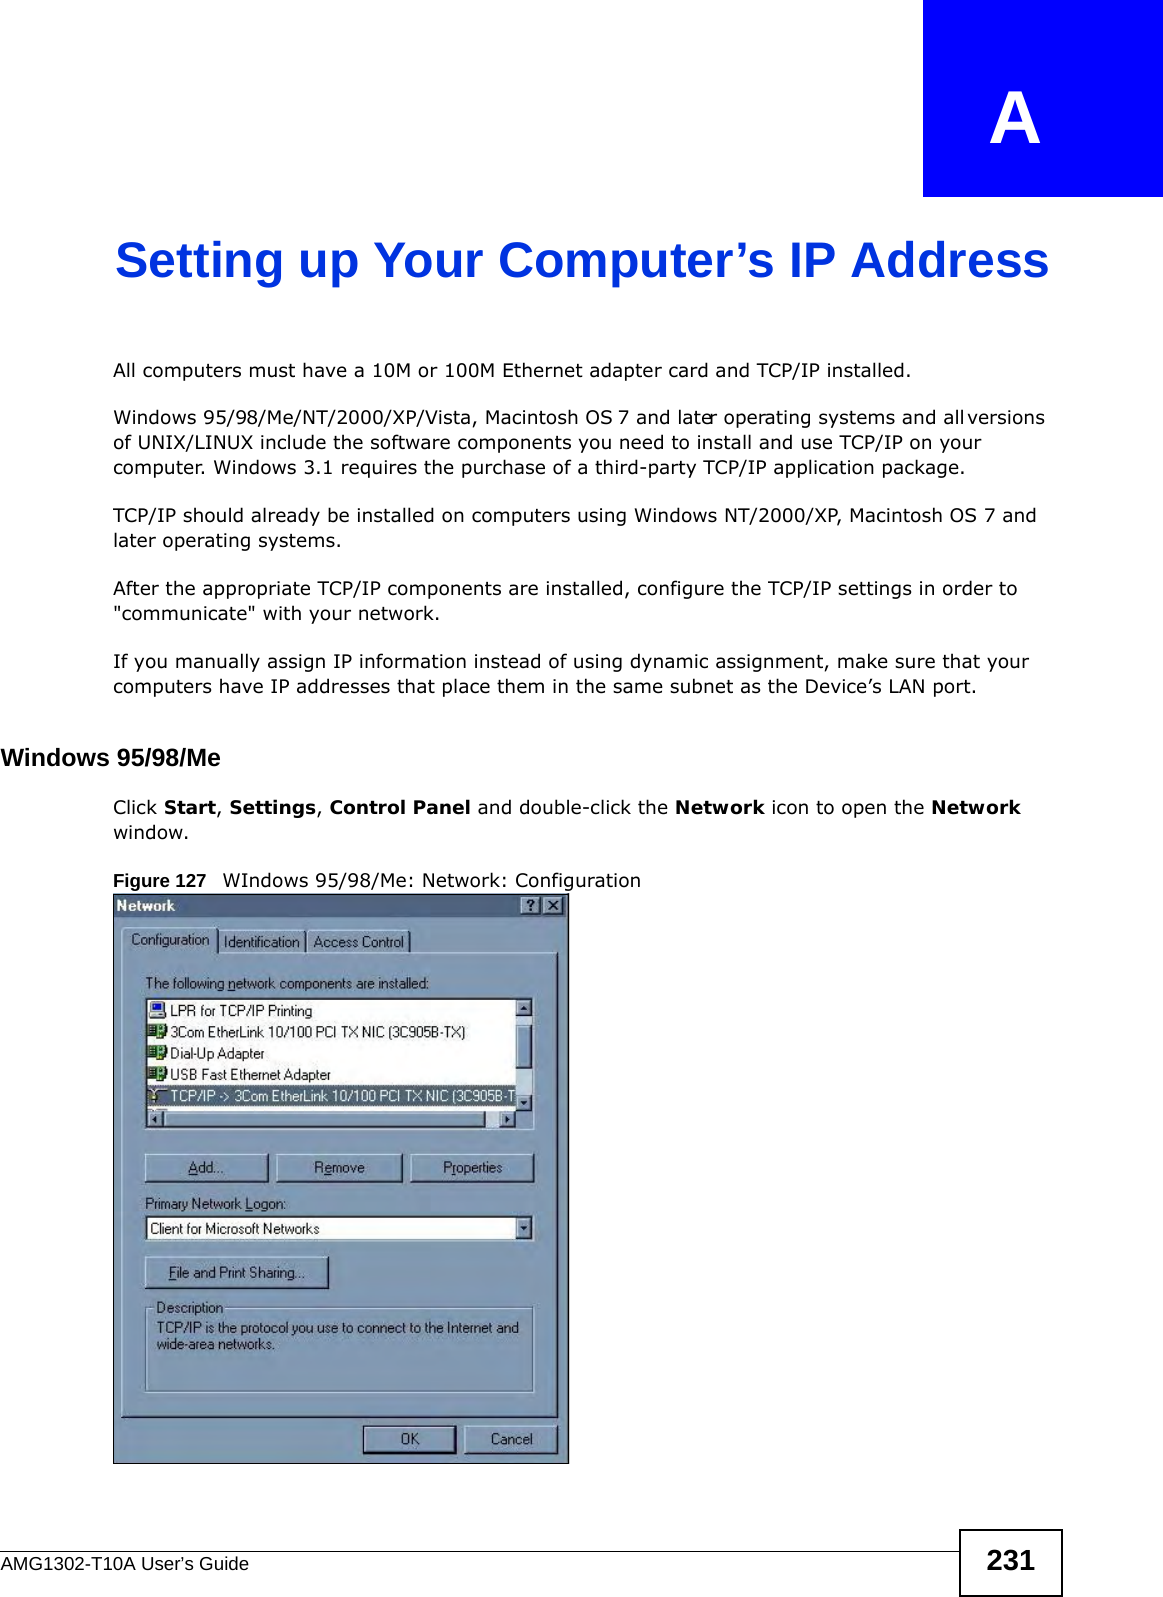 AMG1302-T10A User’s Guide 231APPENDIX   ASetting up Your Computer’s IP AddressAll computers must have a 10M or 100M Ethernet adapter card and TCP/IP installed. Windows 95/98/Me/NT/2000/XP/Vista, Macintosh OS 7 and later operating systems and all versions of UNIX/LINUX include the software components you need to install and use TCP/IP on your computer. Windows 3.1 requires the purchase of a third-party TCP/IP application package.TCP/IP should already be installed on computers using Windows NT/2000/XP, Macintosh OS 7 and later operating systems.After the appropriate TCP/IP components are installed, configure the TCP/IP settings in order to &quot;communicate&quot; with your network. If you manually assign IP information instead of using dynamic assignment, make sure that your computers have IP addresses that place them in the same subnet as the Device’s LAN port.Windows 95/98/MeClick Start, Settings, Control Panel and double-click the Network icon to open the Network window.Figure 127   WIndows 95/98/Me: Network: Configuration